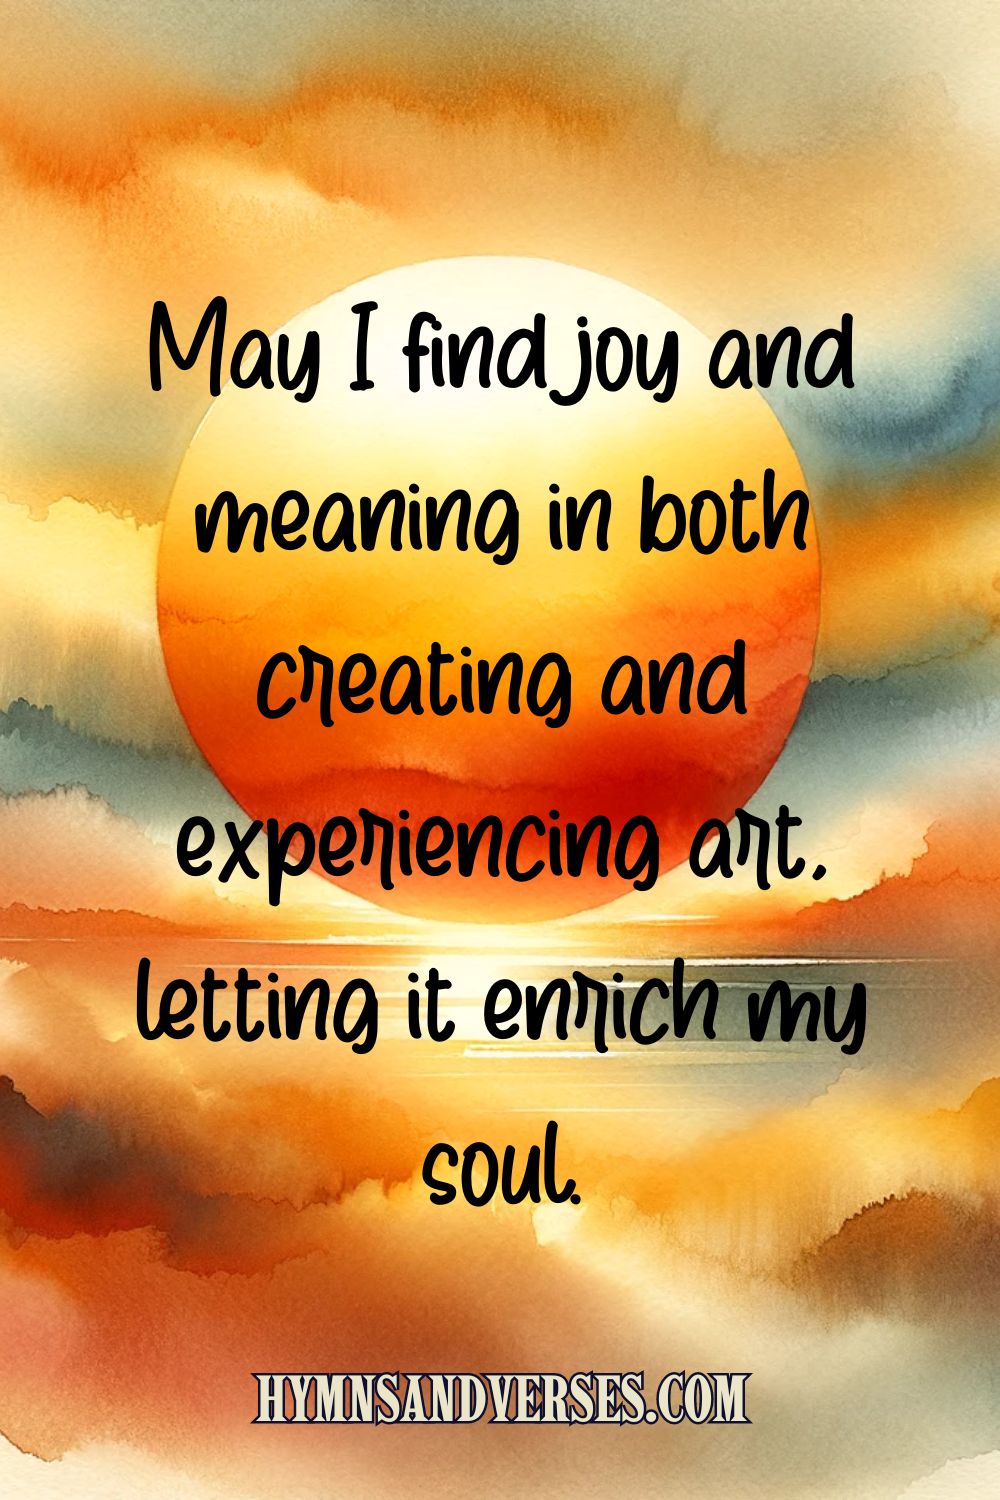 Quote image reads: May I find joy and meaning in both creating and experiencing art, letting it enrich my soul.